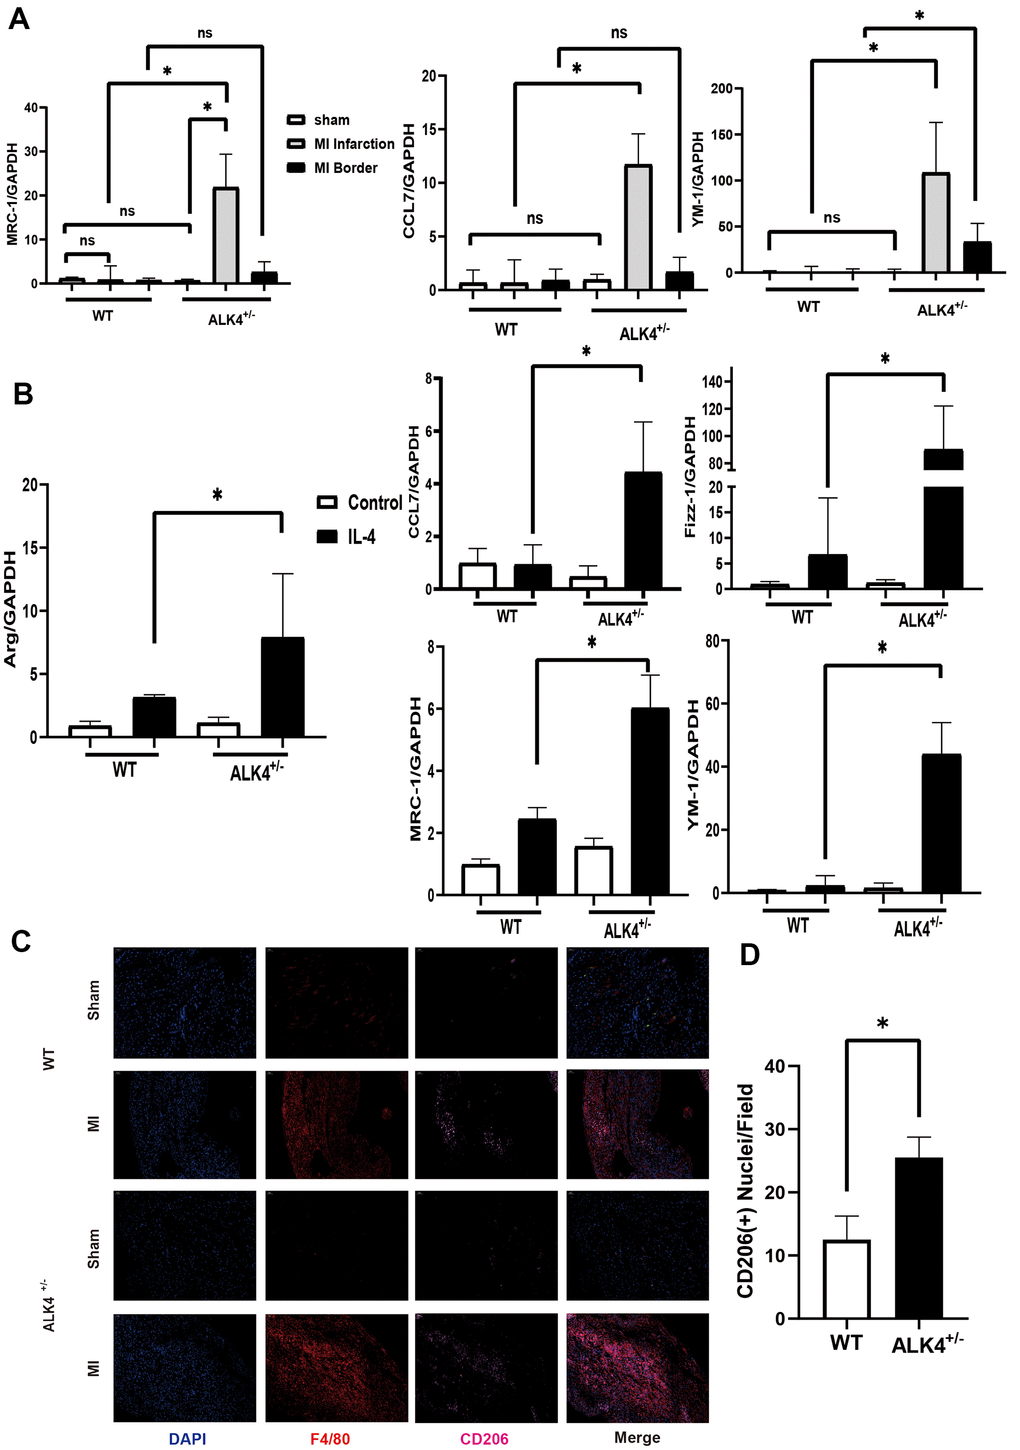 ALK4 haplodeficency promotes anti-inflammation response. (A) The mRNA expression of MRC-1, CCL7 and YM-1 were detected in WT and ALK4+/- mice on the 7th day post-MI (n=4 for each). (B) The mRNA expression of Arg, CCL7, Fizz-1, MRC-1 and YM-1 were detected in bone marrow derived macrophages from WT and ALK4+/- mice stimulated by IL-4 in 4 groups (n=4 for each). (C) CD206 expression in WT and ALK4+/- mice on the 7th day post-MI in immunofluorescence (n=4 for each). (D) The quantitative analysis of the CD206 expression in the MI group. * p